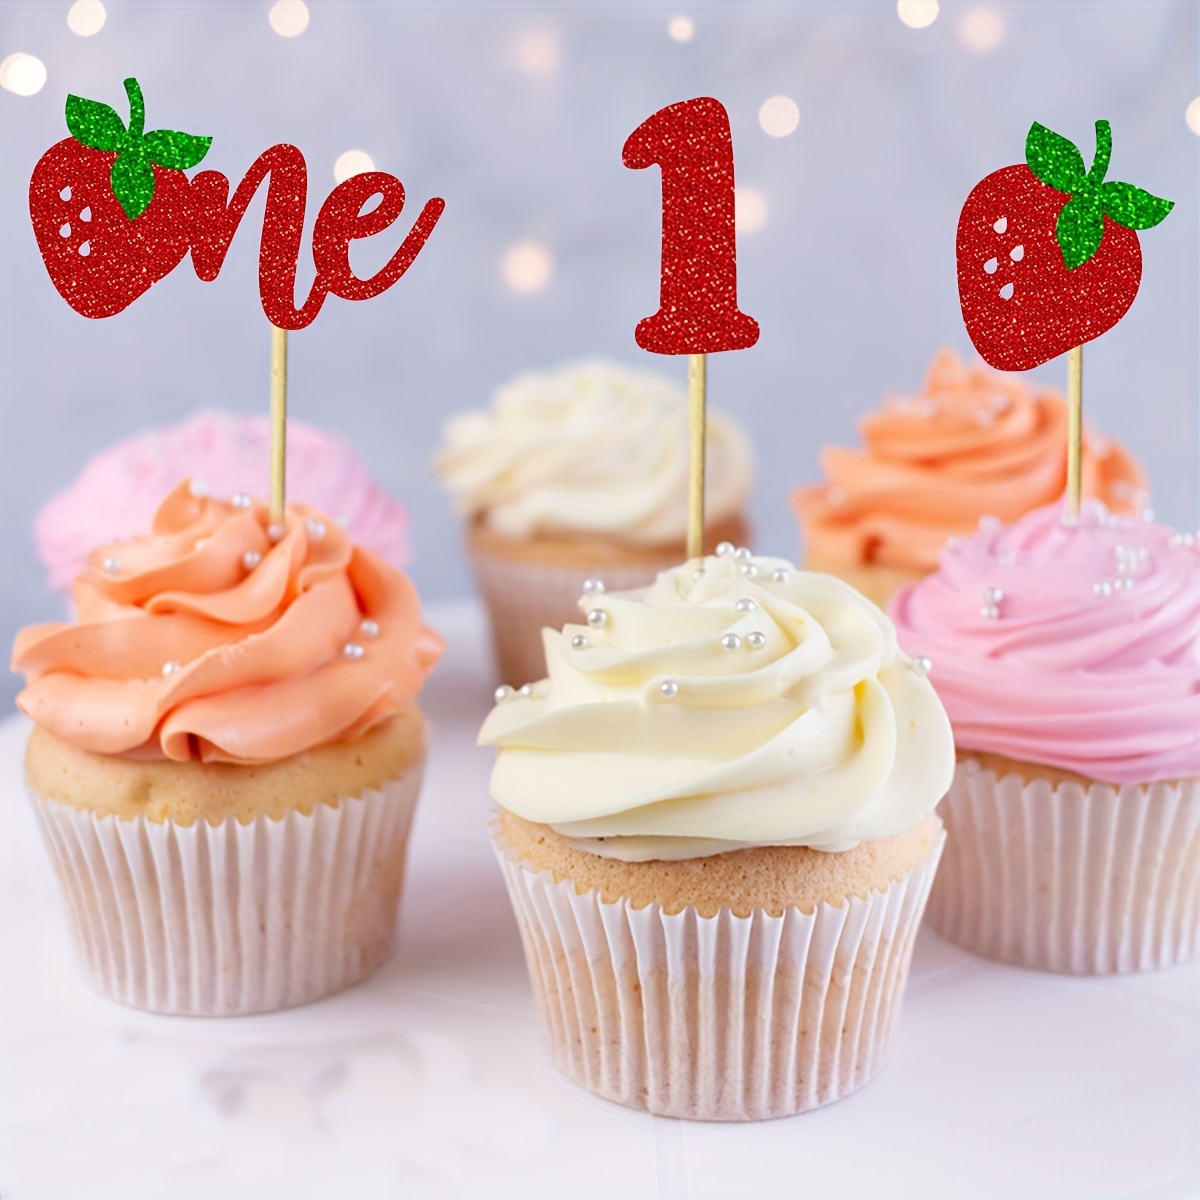 

24pcs Strawberry 1 Cupcake Toppers Glitter Strawberry 1 First Birthday Strawberry Cupcake Picks For Fruit Theme Baby Shower Kids 1st Birthday Anniversary Party Cake Decorations Supplies